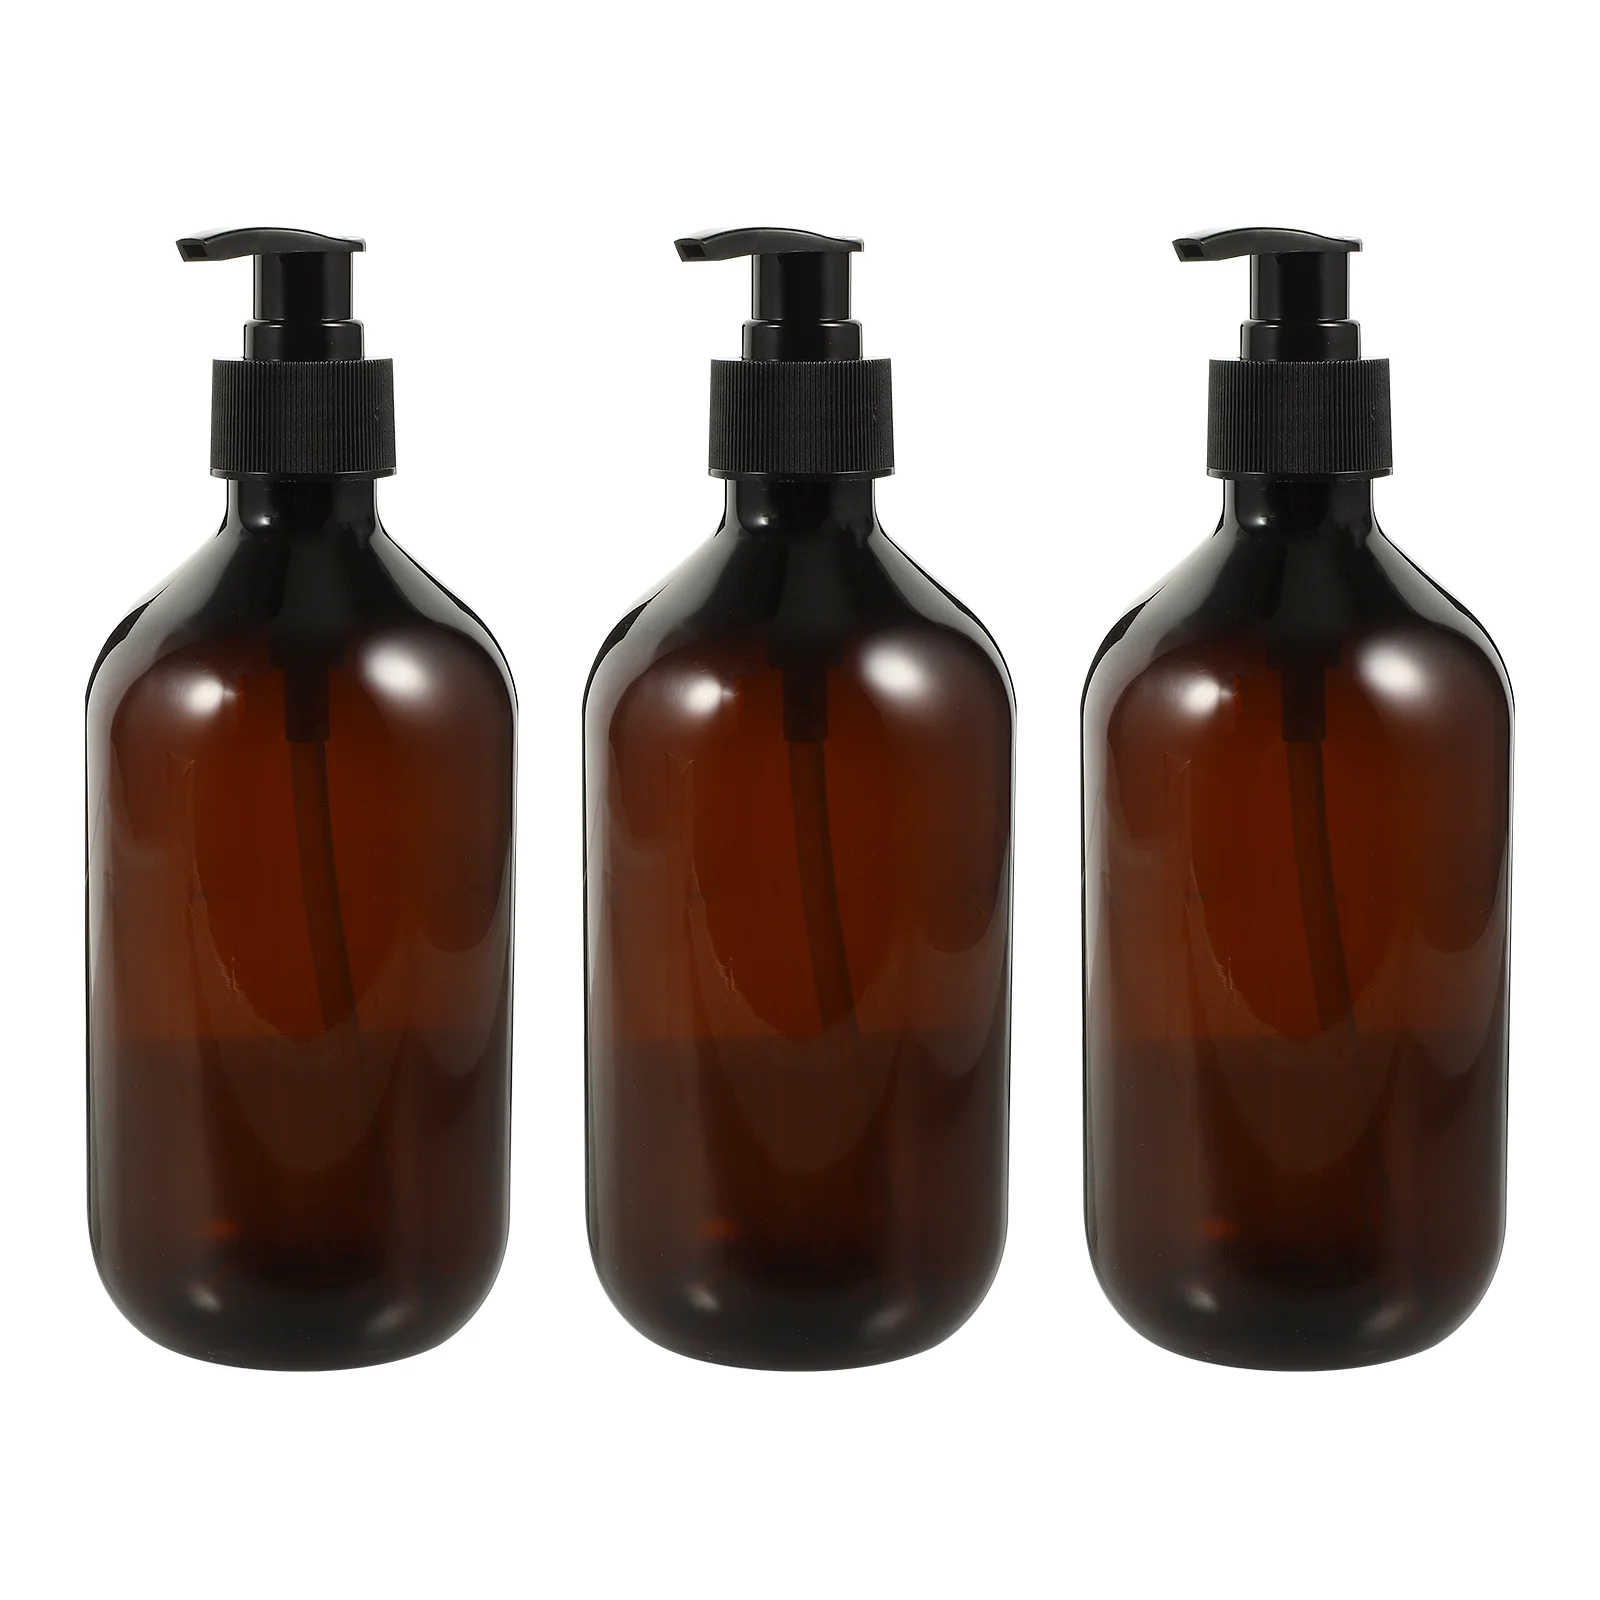 

3 Pcs Soap Hand Dispensing Body Lotion Bottle Travel Hand The Body Lotions